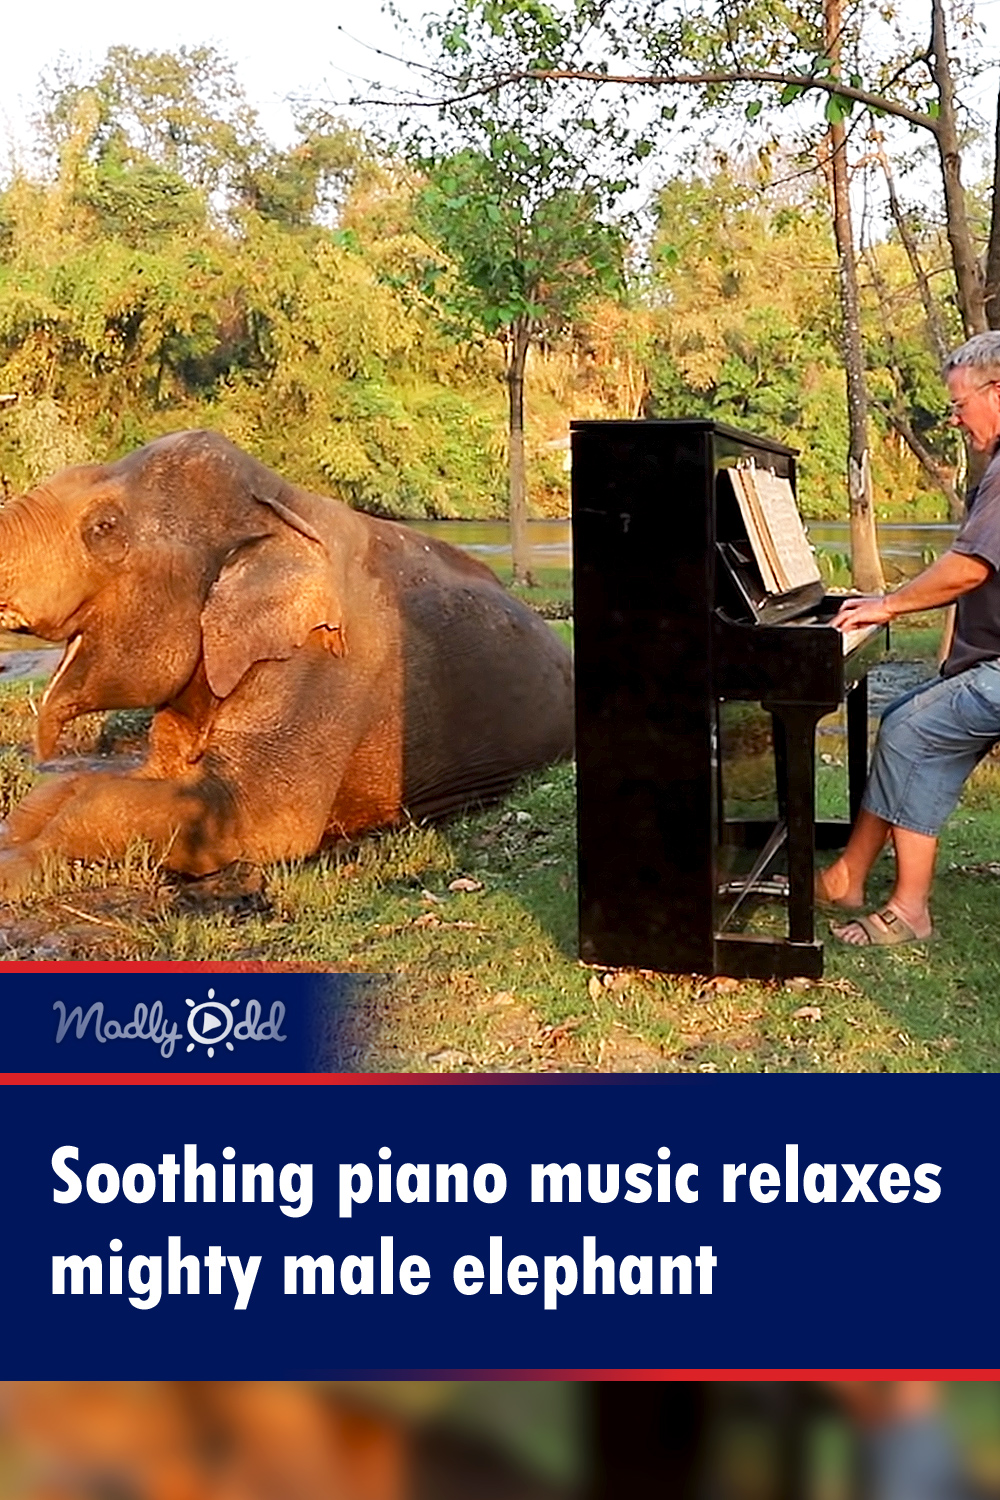 Soothing piano music relaxes mighty male elephant